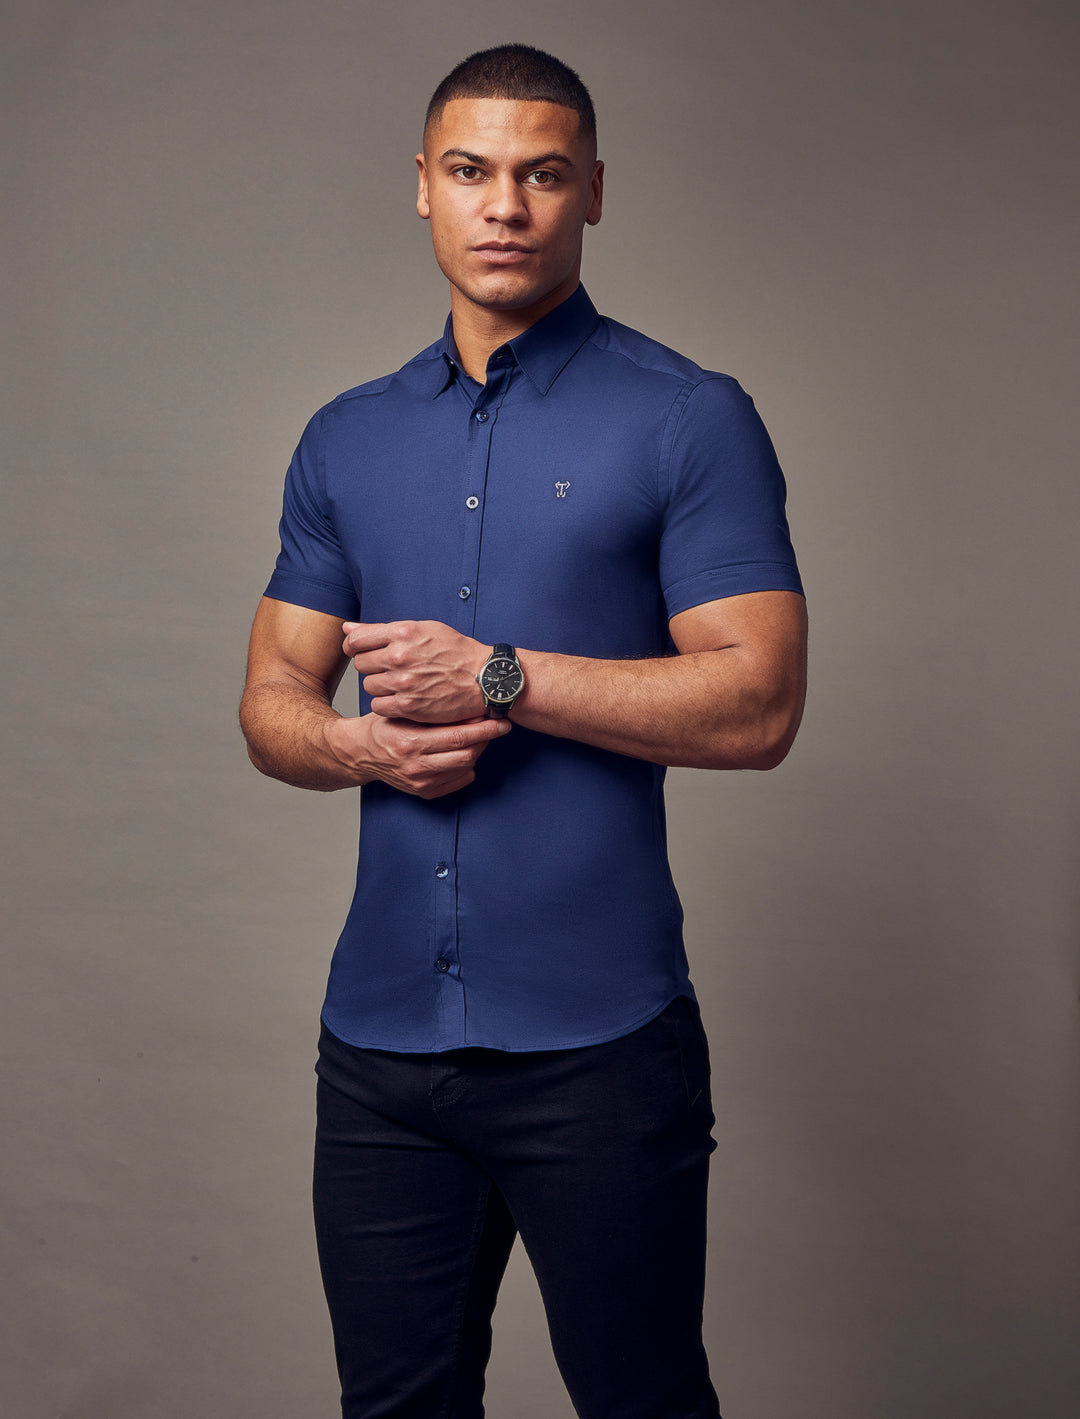 Muscle Fit Short Sleeve Shirt